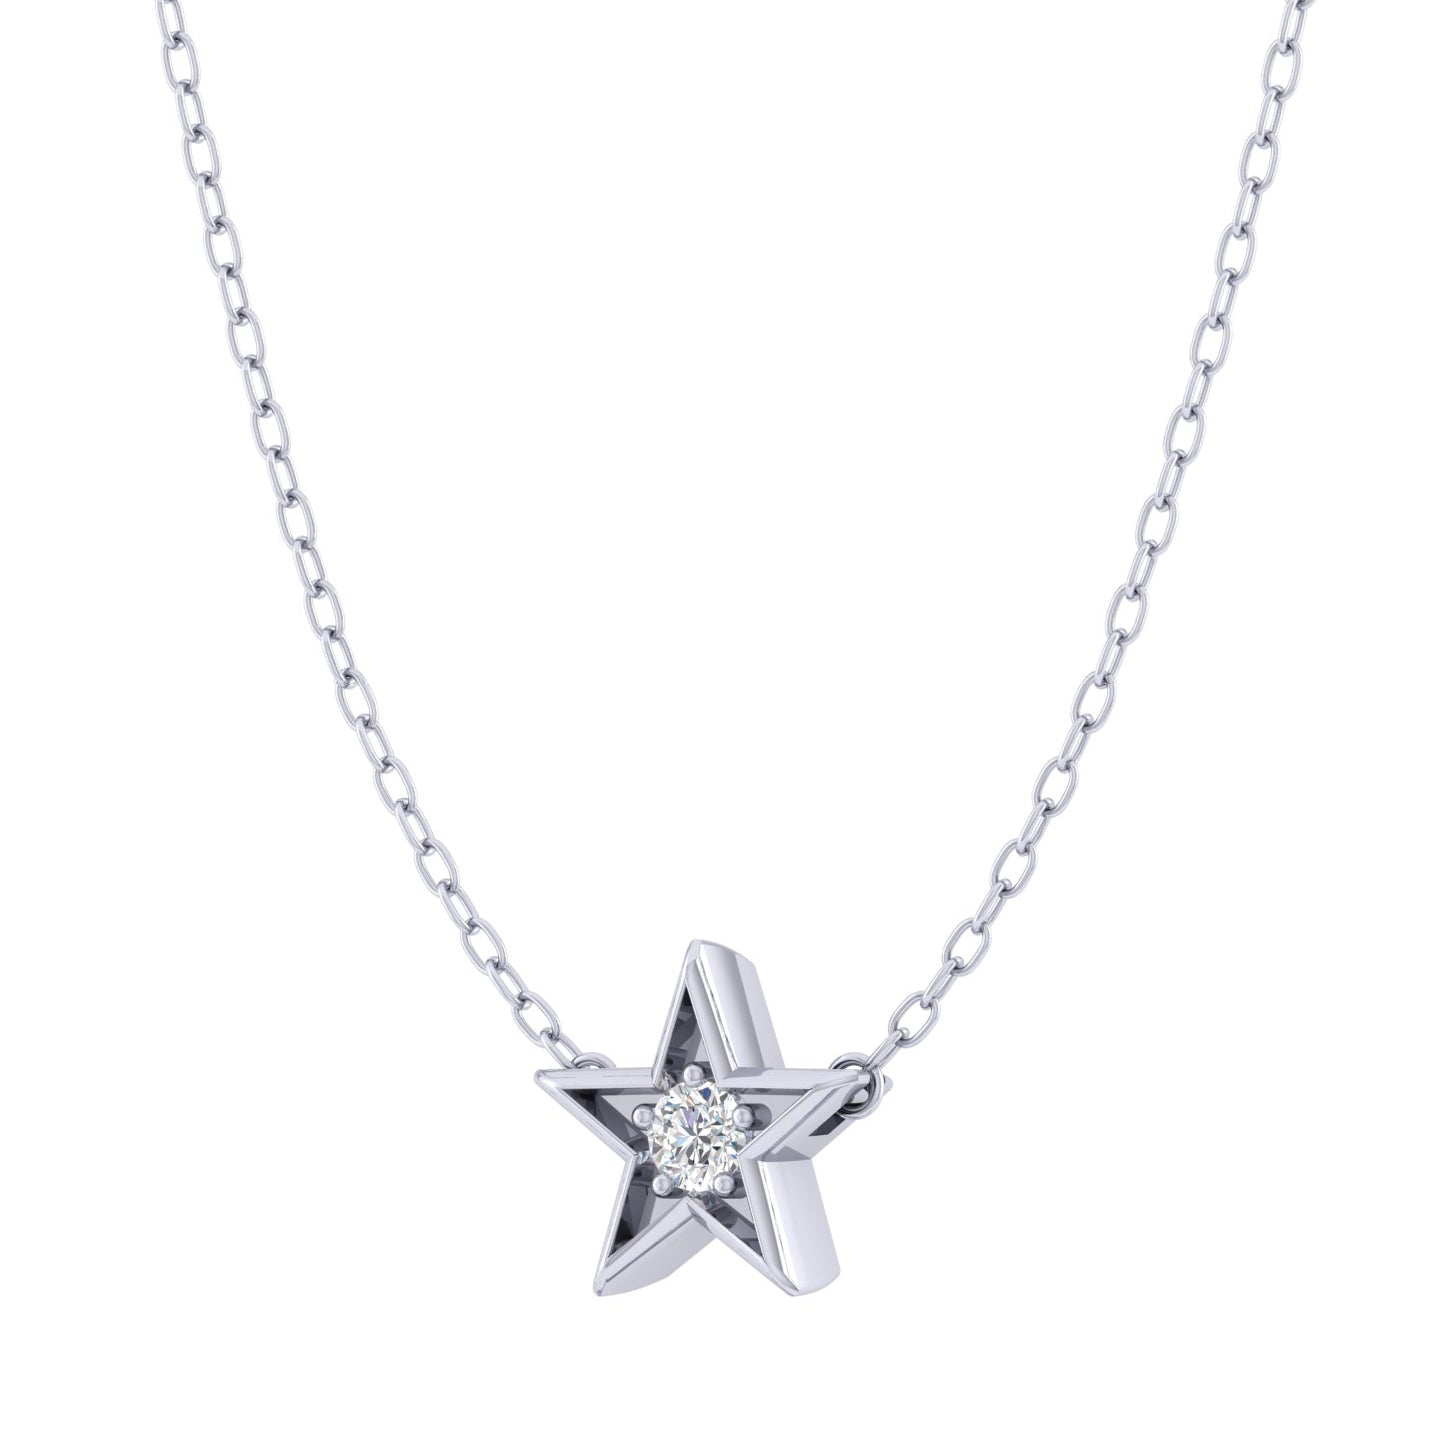 Star 1/20 Cttw Natural Diamond Pendant Necklace set in 925 Sterling Silver jewelry gift layring